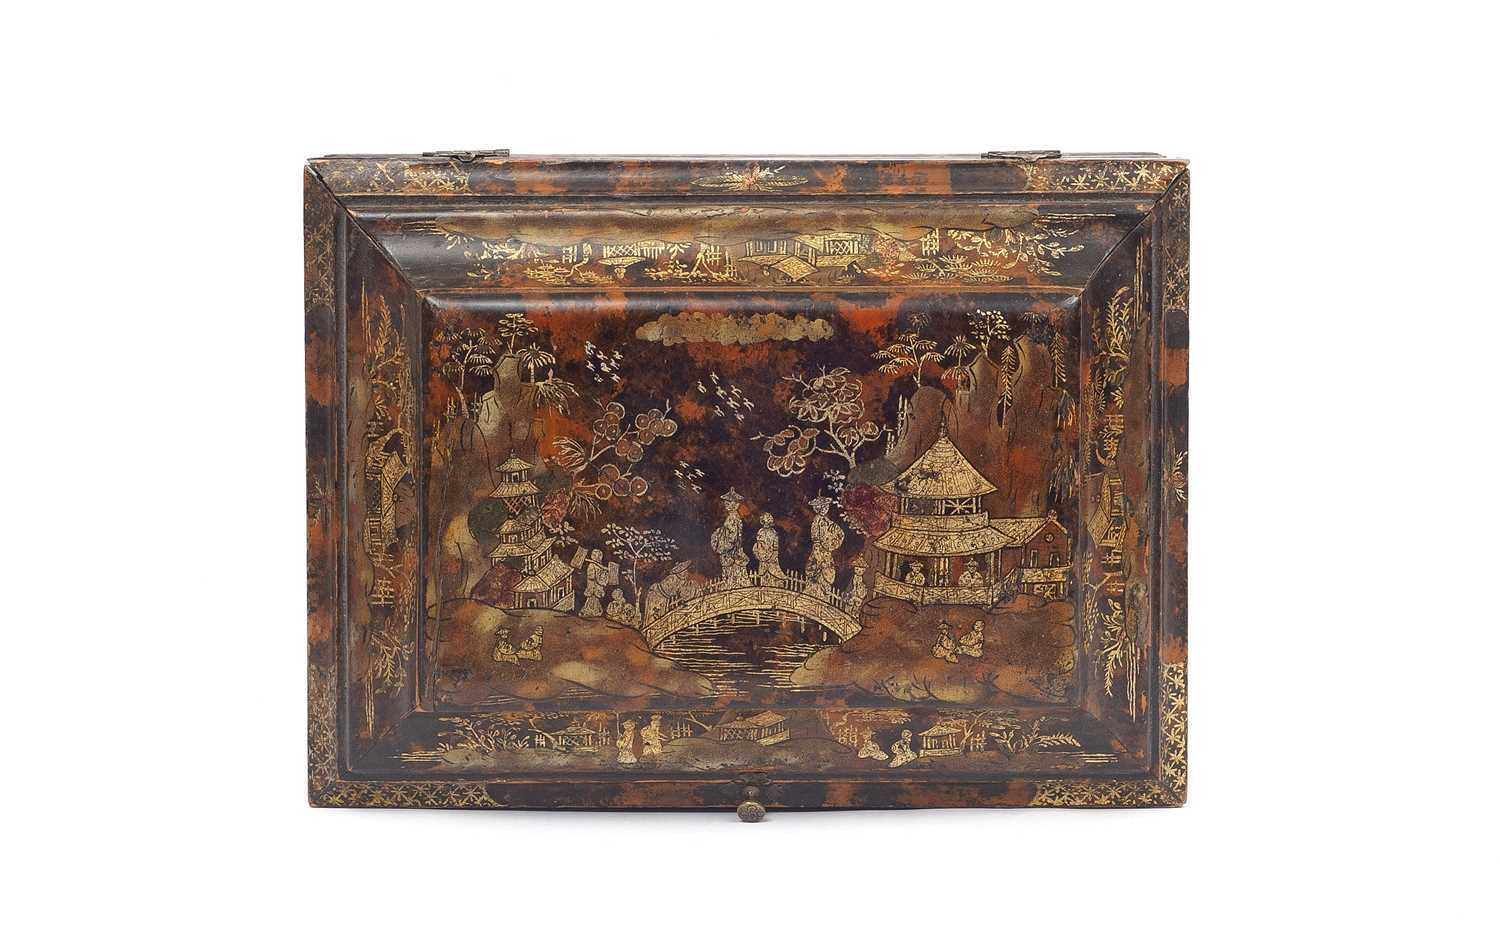 A FINE 18TH CENTURY CHINOISERIE DECORATED AND FAUX TORTOISESHELL PAINTED BOX - Image 2 of 4